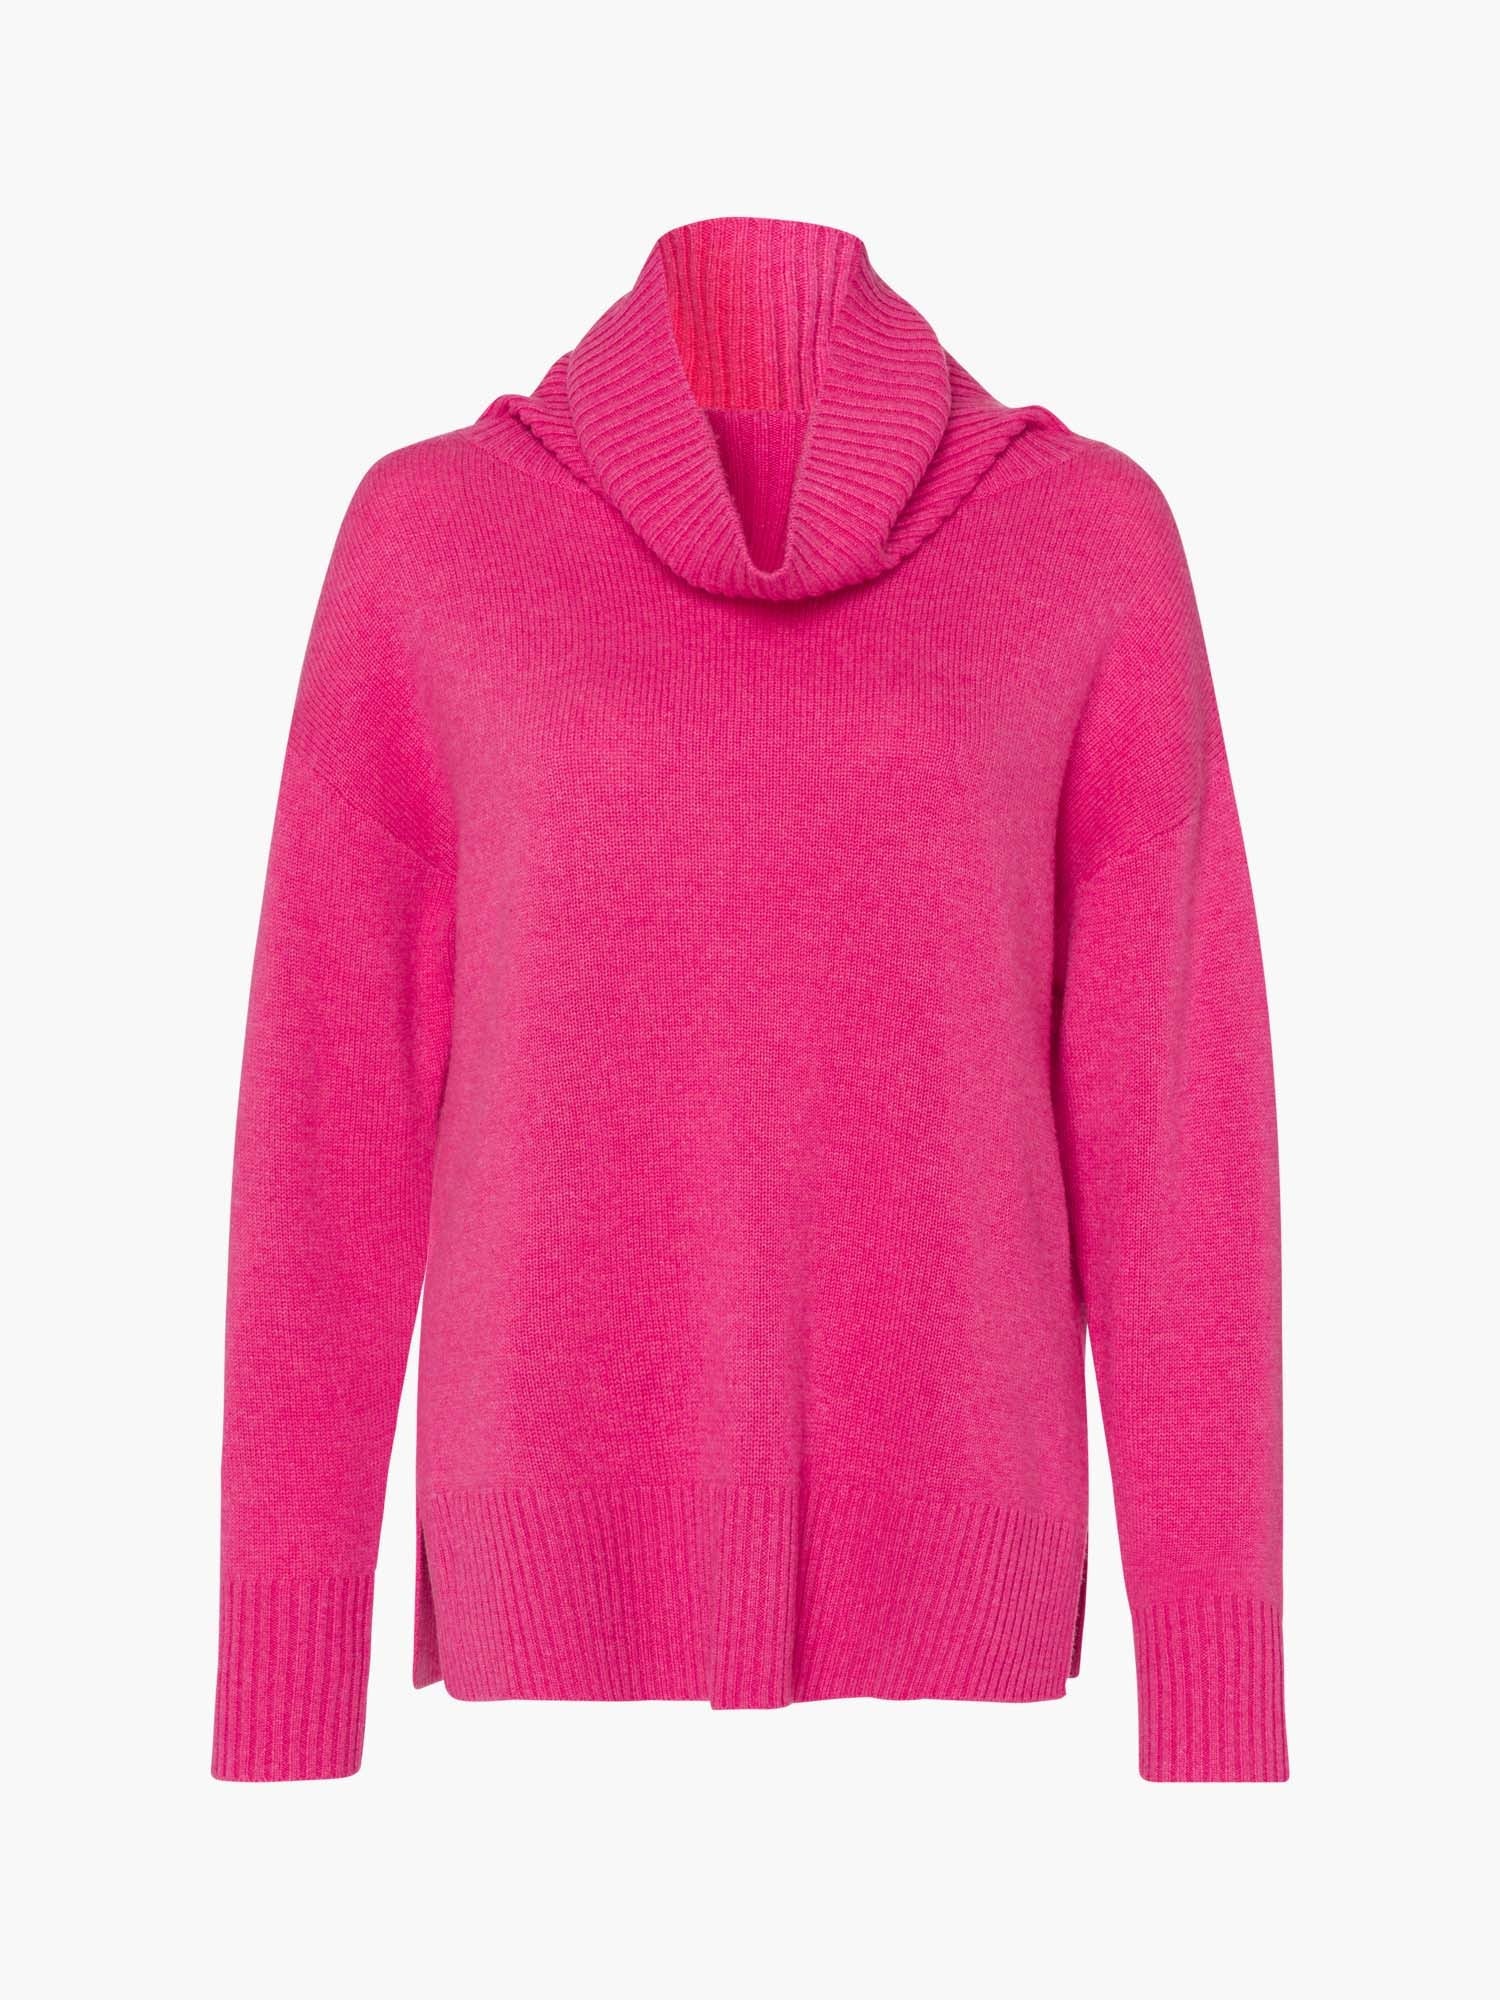 FTC-Cashmere-OUTLET-SALE-Pullover-Highneck-Strick-ARCHIVE-COLLECTION_a8f69387-8a2d-4948-aa65-eda3b8466dc0.jpg